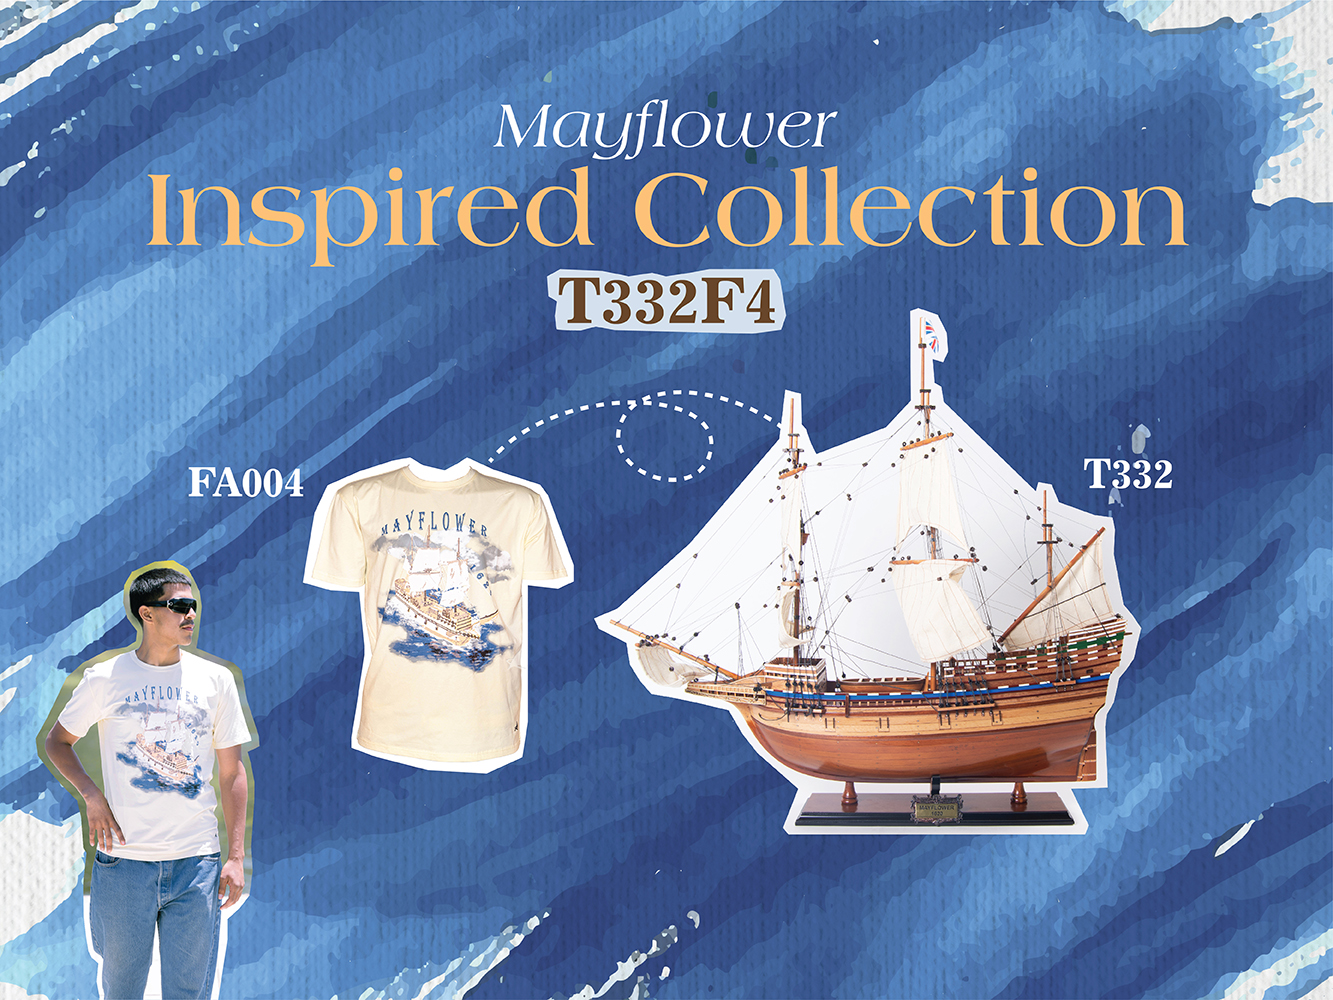 T332F4 Majestic Mayflower Combo: A Model Ship and Iconic T-Shirt t332f4-majestic-mayflower-combo-a-model-ship-and-iconic-tshirt-l01.jpg